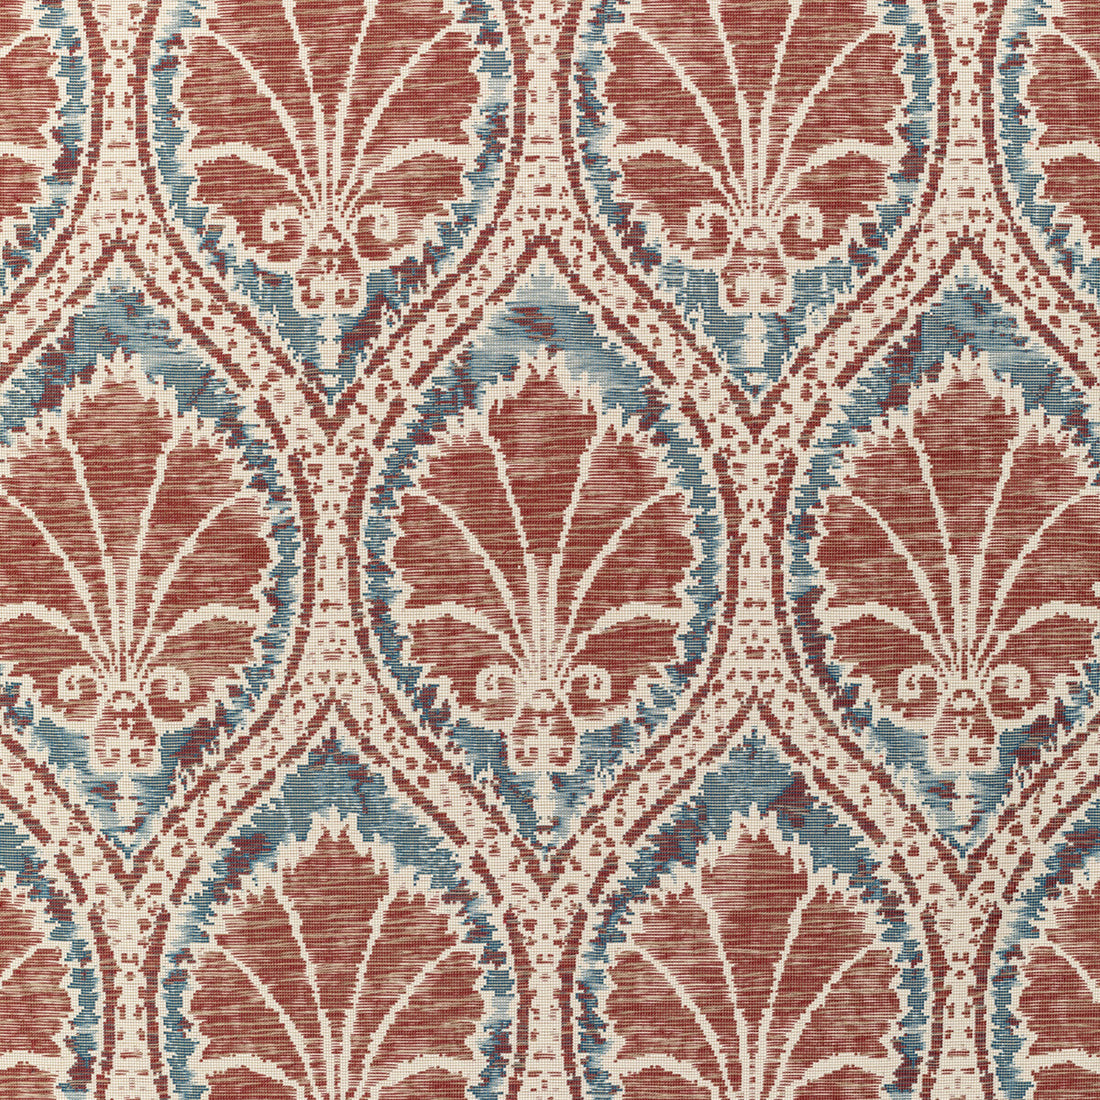 Seville Weave fabric in denim/brick color - pattern 2021108.524.0 - by Lee Jofa in the Triana Weaves collection